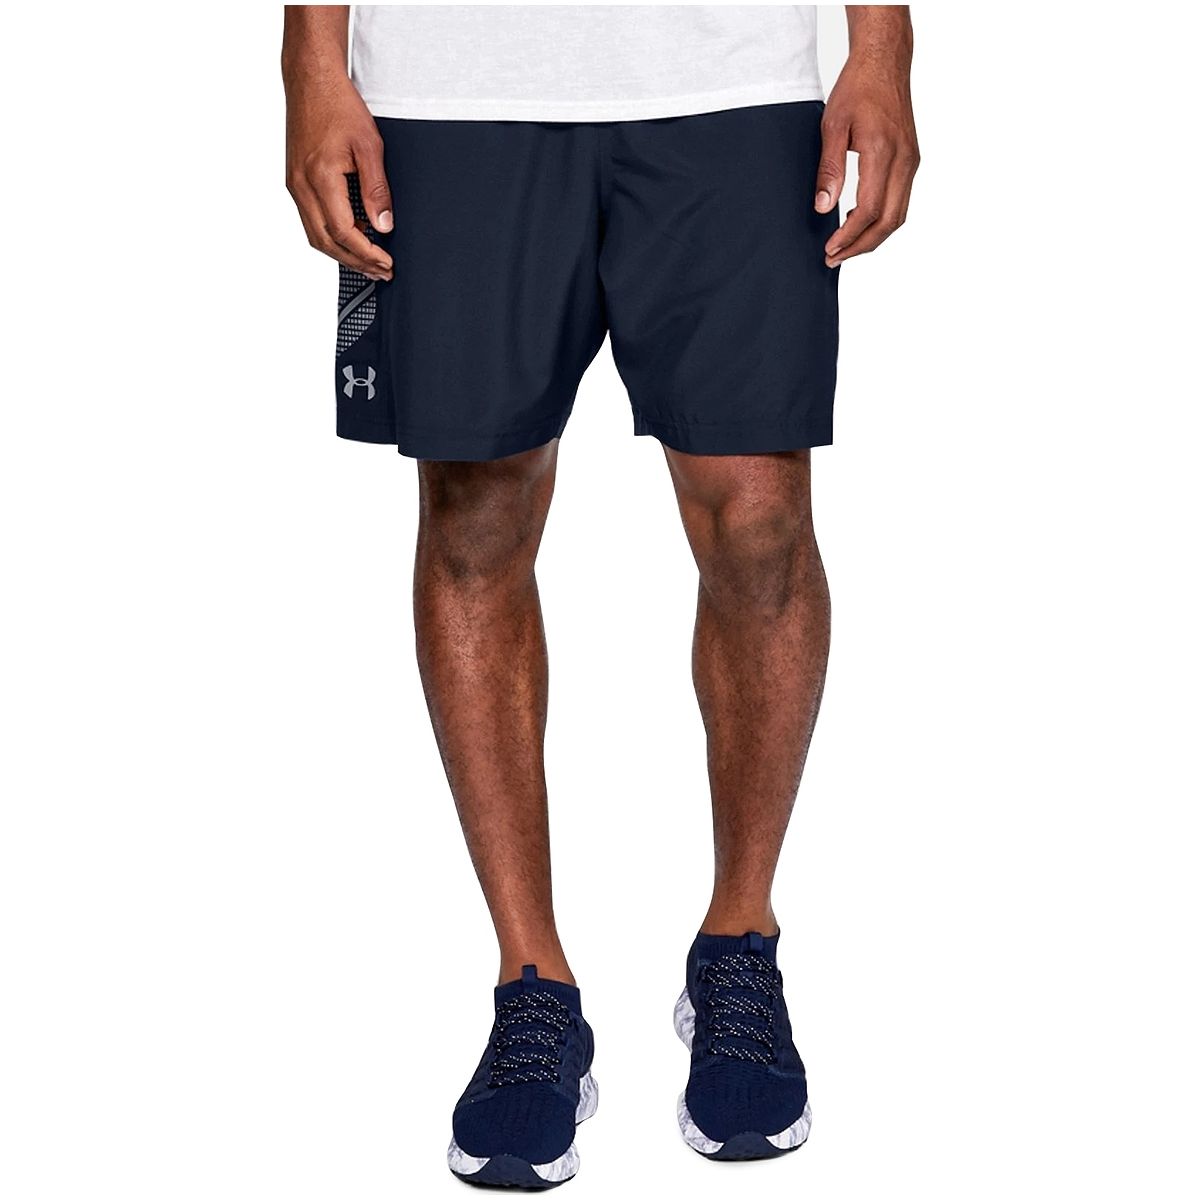 Under Armour Woven Graphic Men's Shorts 1309651-002